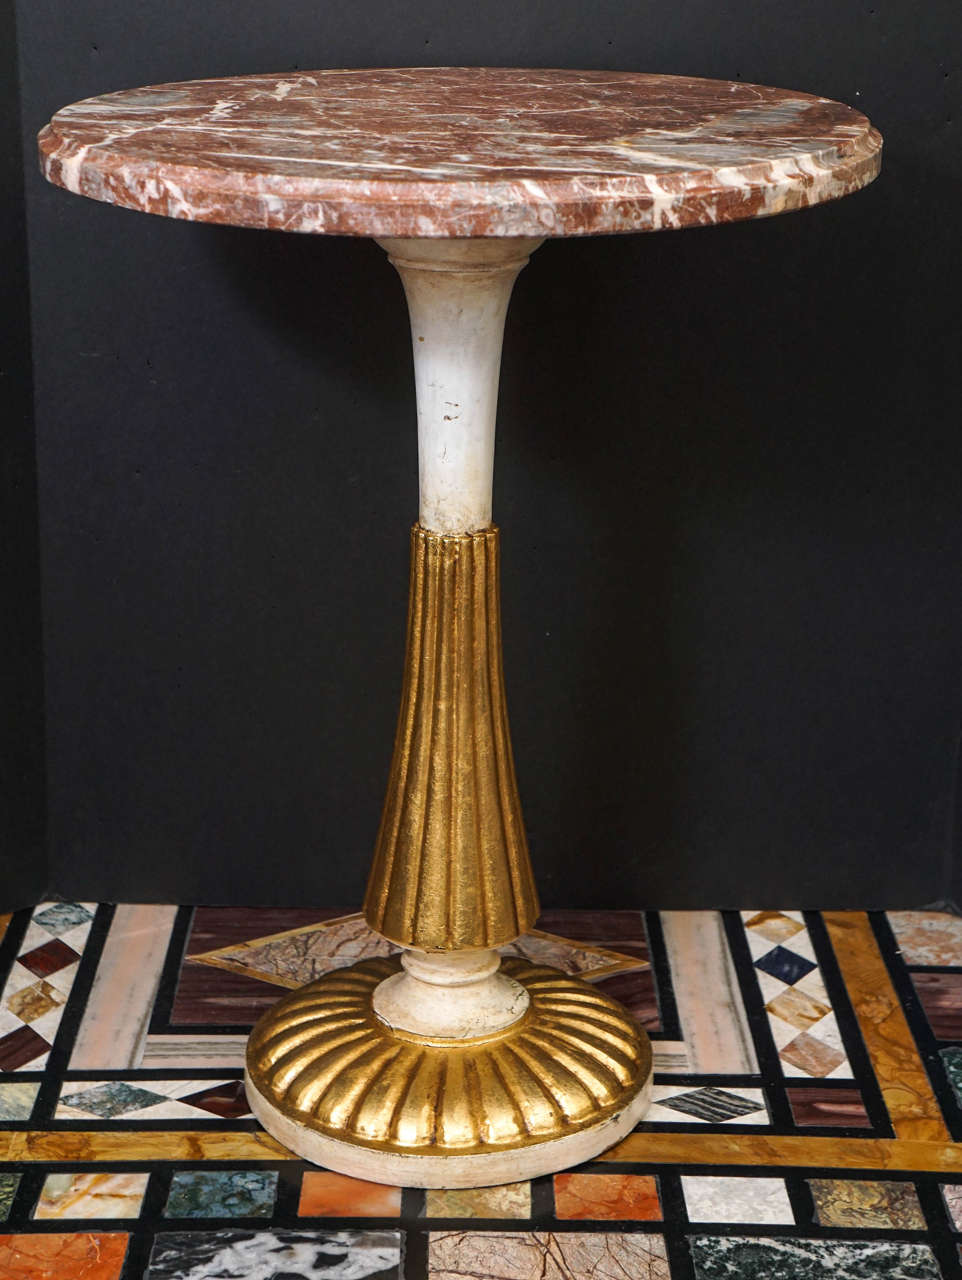 This small low table designed as a smoking or cocktail table would look great in a modern simple room or in an antique style room . Made from carved wood which has been gessoed and then painted and gilded. The tables gilding is rich and in excellent